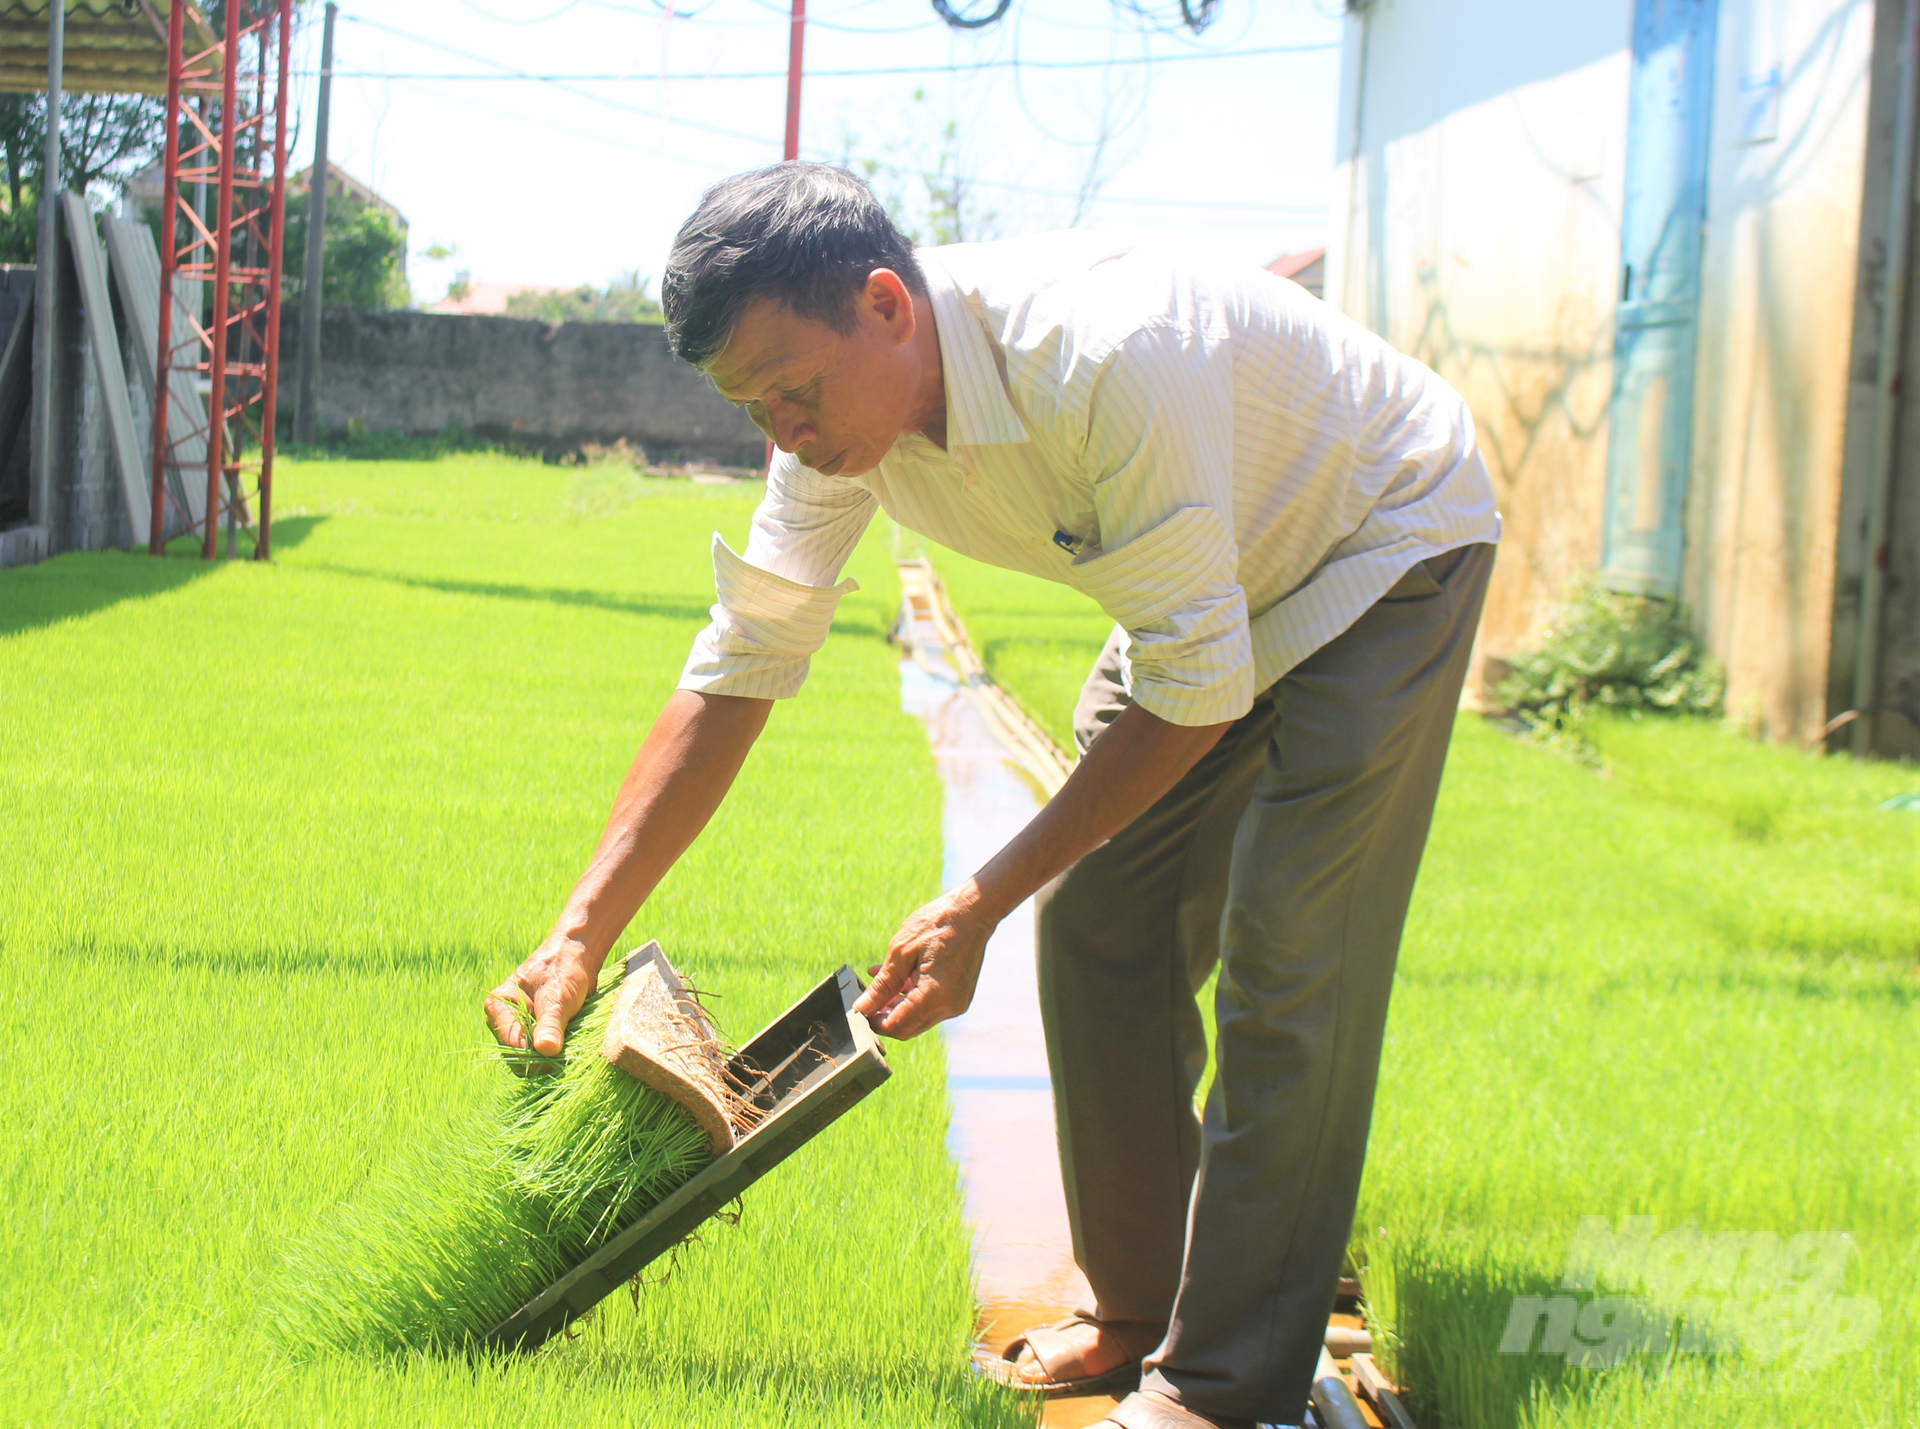 According to Mr. Vu Van Quyet, Chairman of the Board of Directors of Hop Tien Agricultural Cooperative, Khanh Nhac commune (Yen Khanh, Ninh Binh), building a strong production chain helps mechanization more conveniently. Photo: Kien Trung.